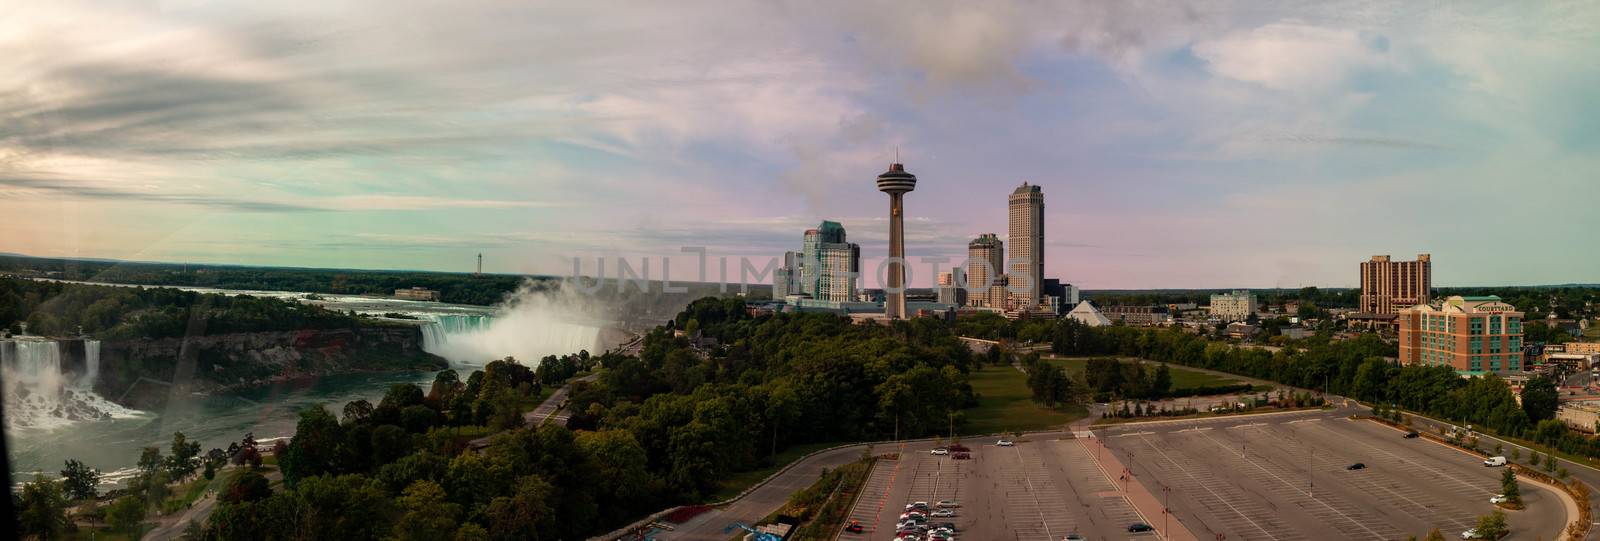 Niagara falls Canada: of an aerial panormal of the falls and the city of Niagara. Niagara is one of Canadas most popular tourist destinations and has been hit hard by covid. by mynewturtle1